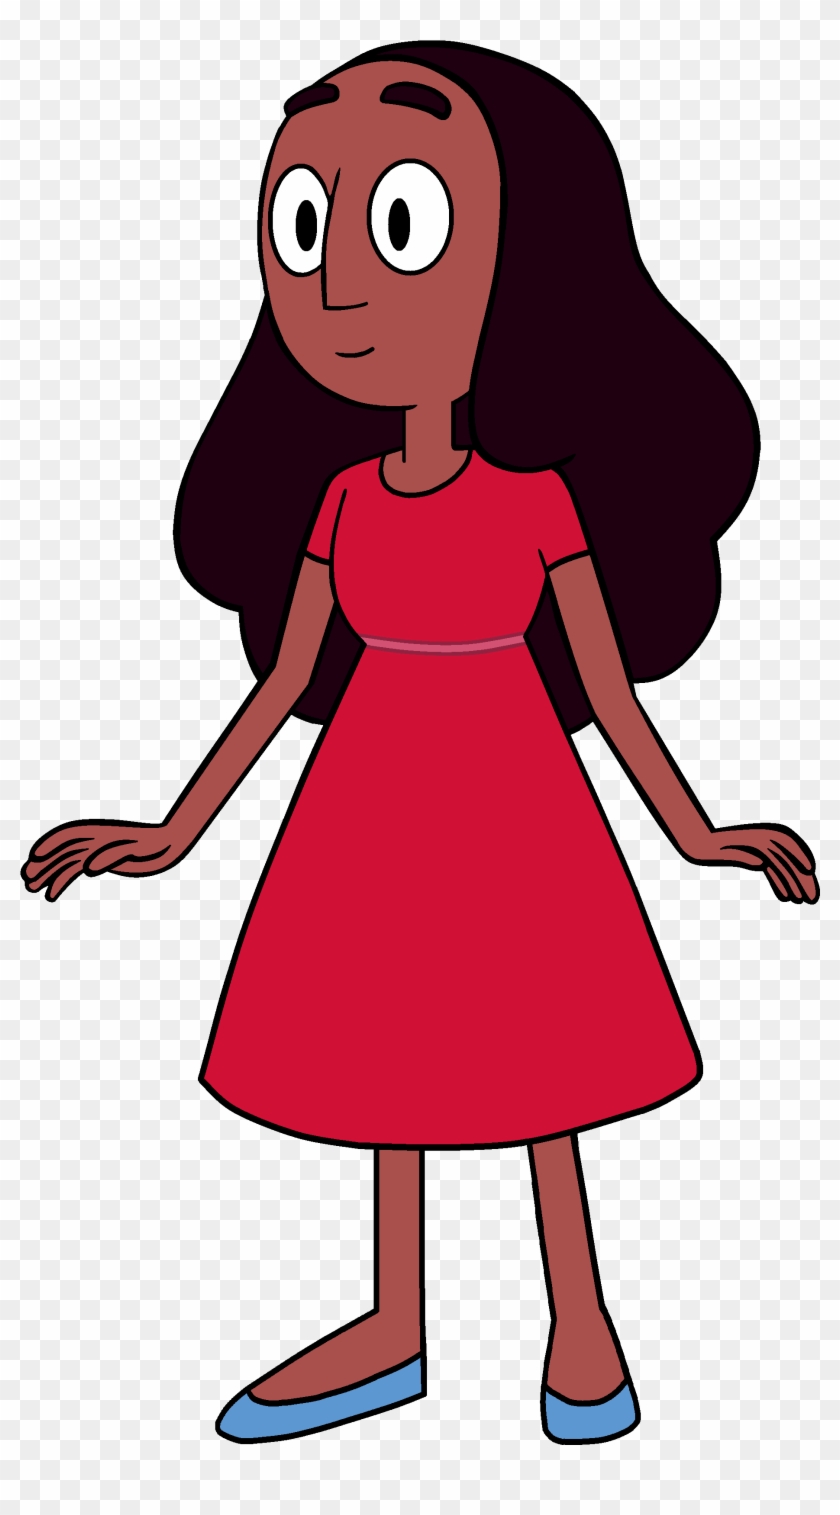 Steven's Birthday Connie Model - Steven Universe Characters Connie Clipart